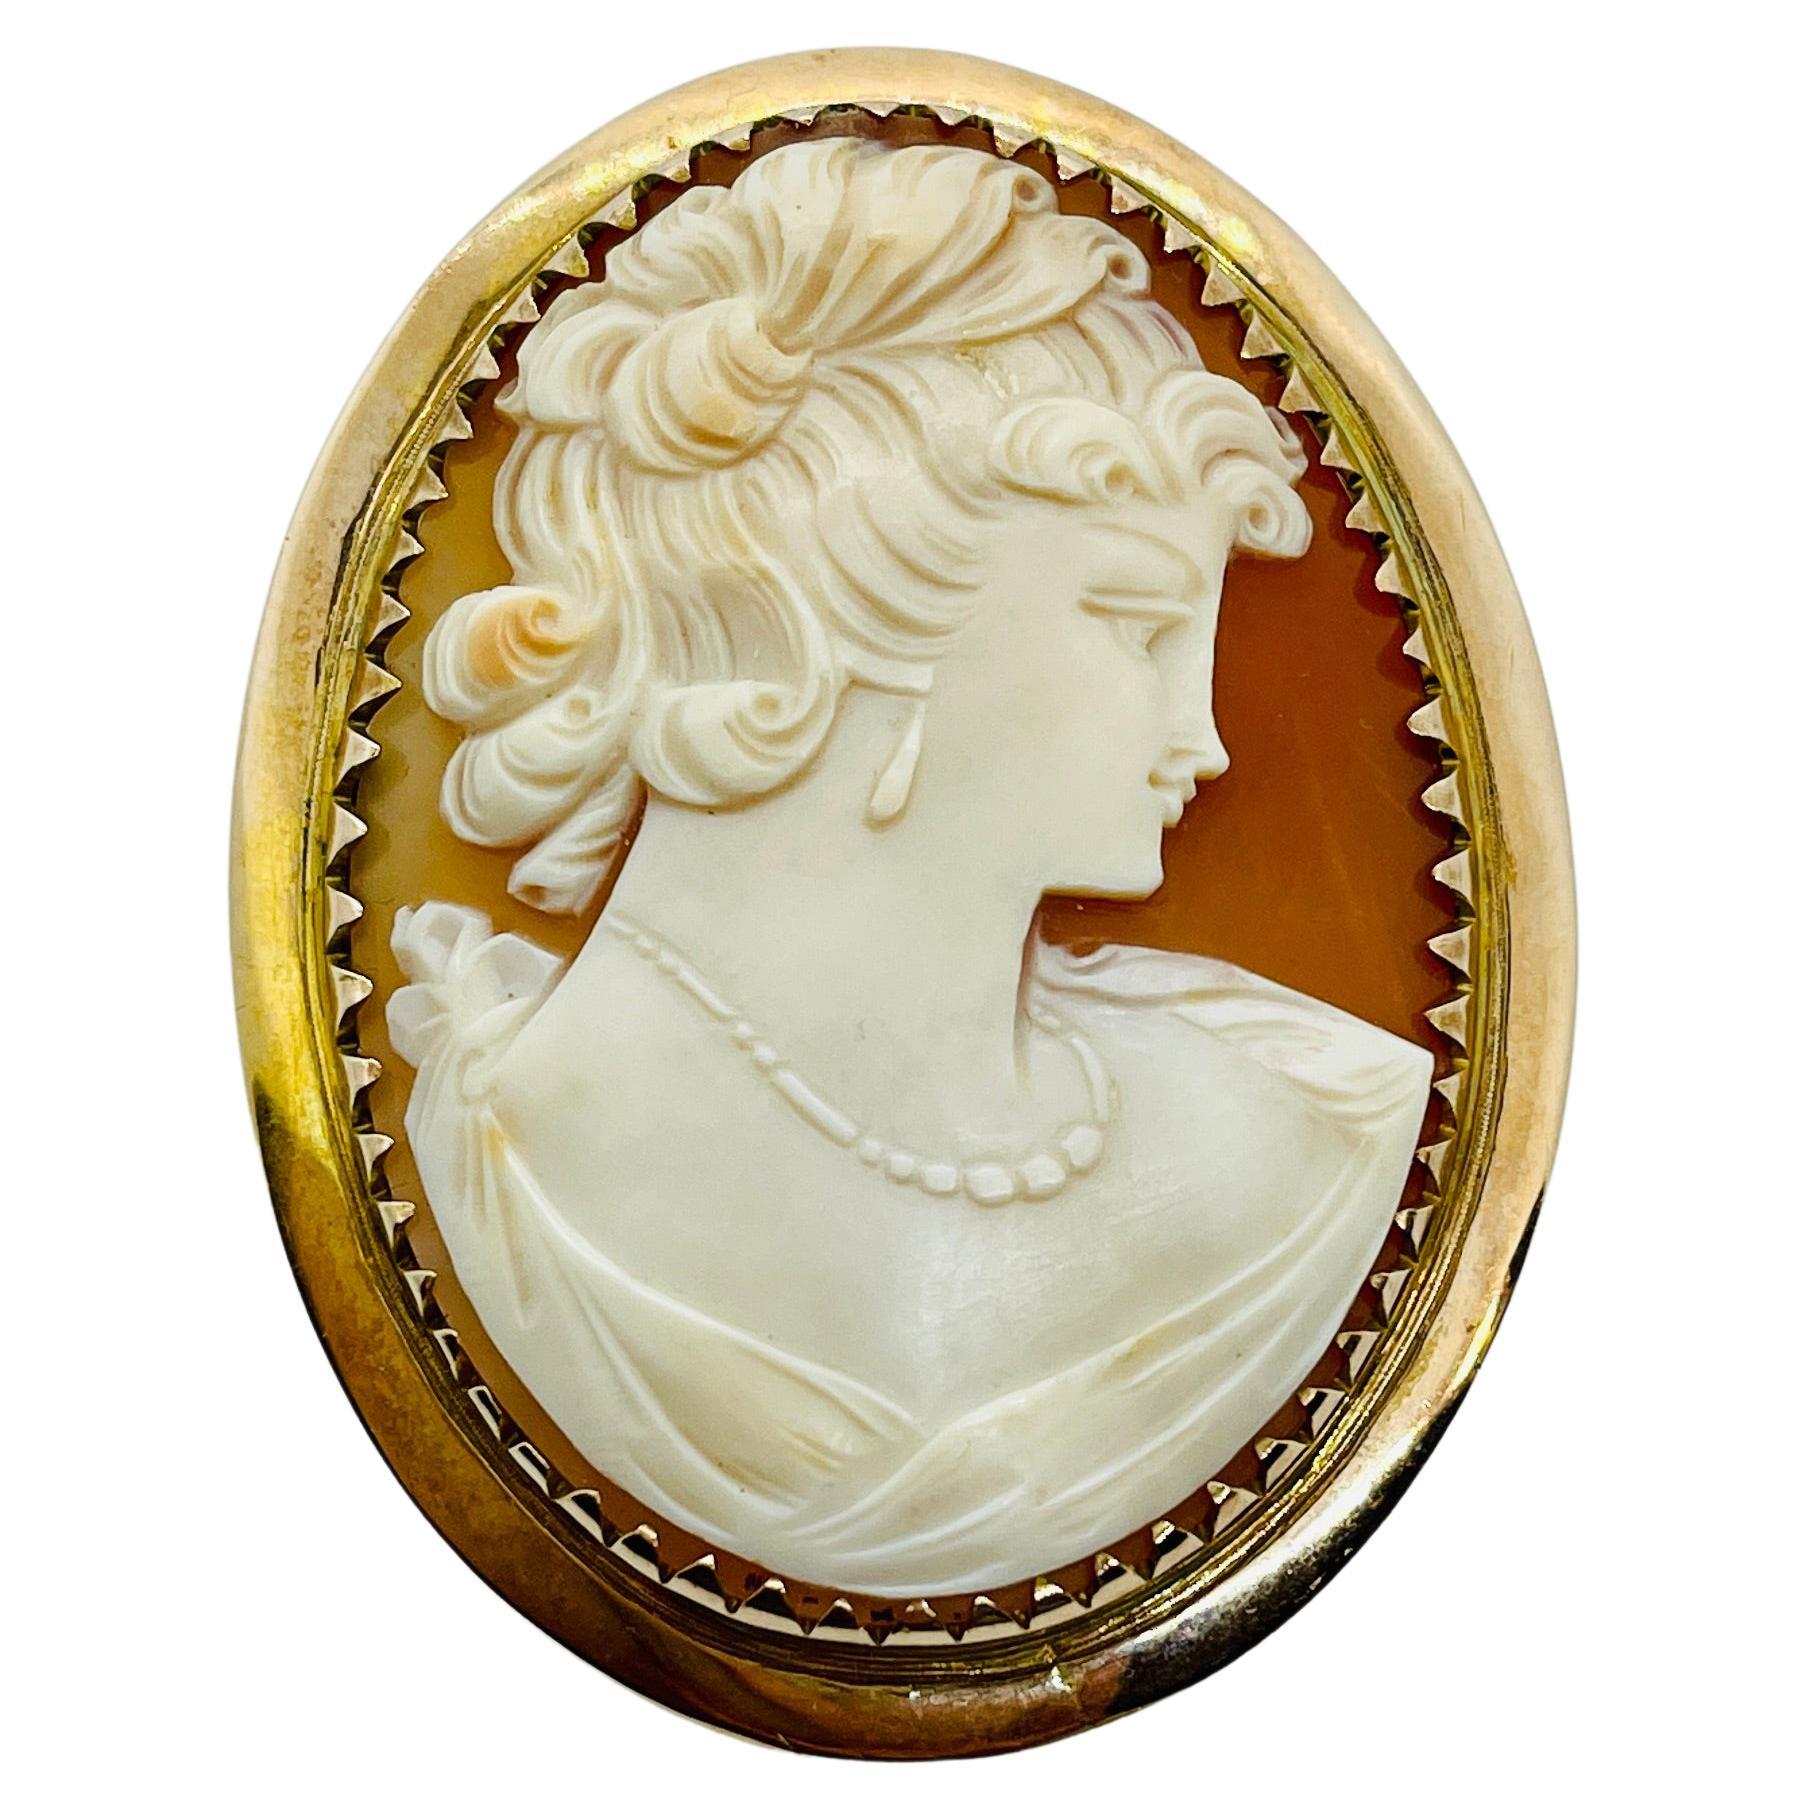 Vintage 9ct Gold Cameo Brooch NeoClassical Lady Wearing Earrings Necklace c1940s For Sale